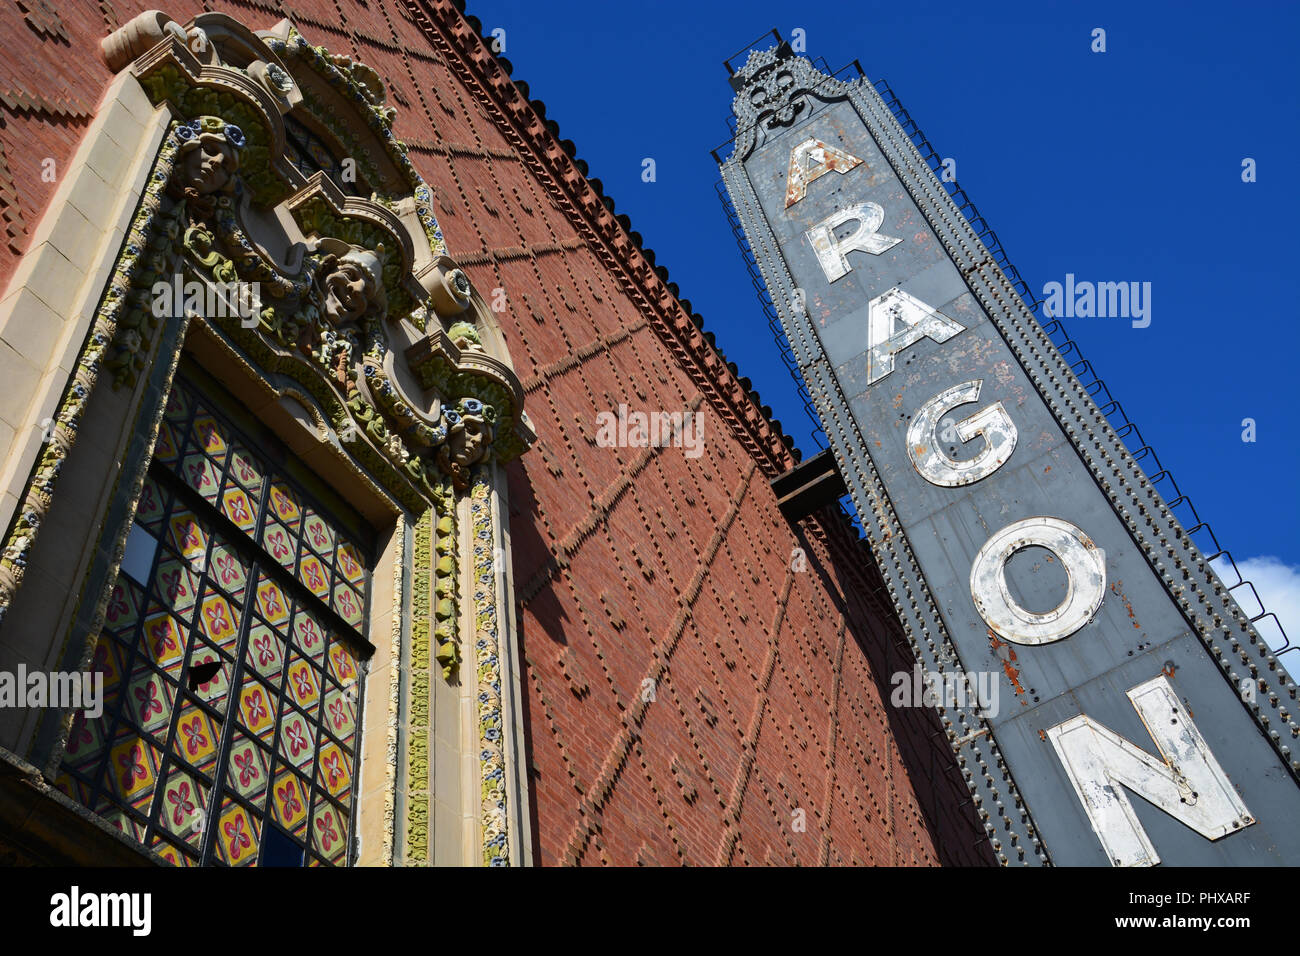 The marque to The Aragon Ballroom, which hosts live shows and events in Chicago's north side Uptown neighborhood. Stock Photo